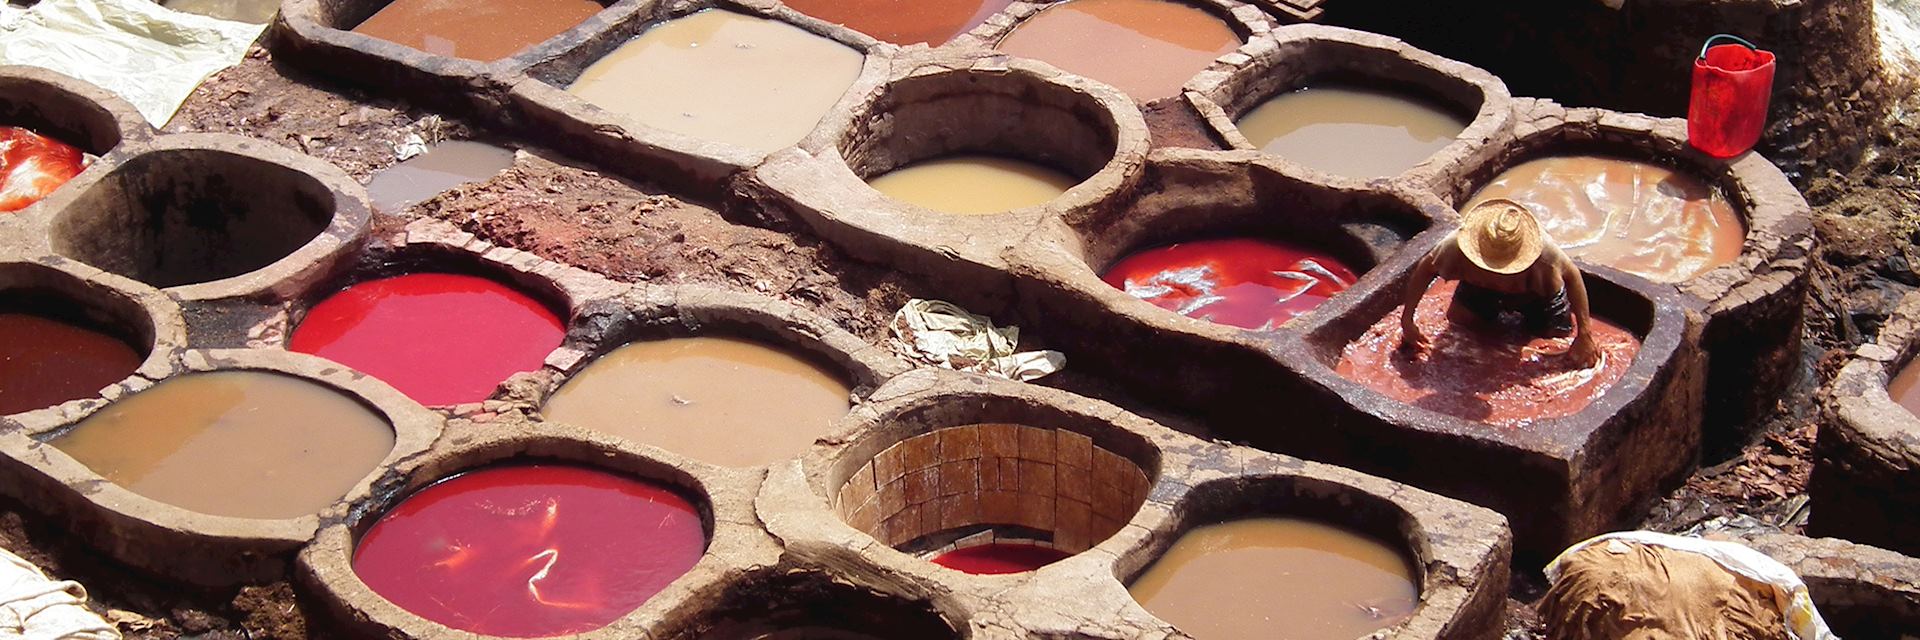 The tanneries, Fez, Morocco